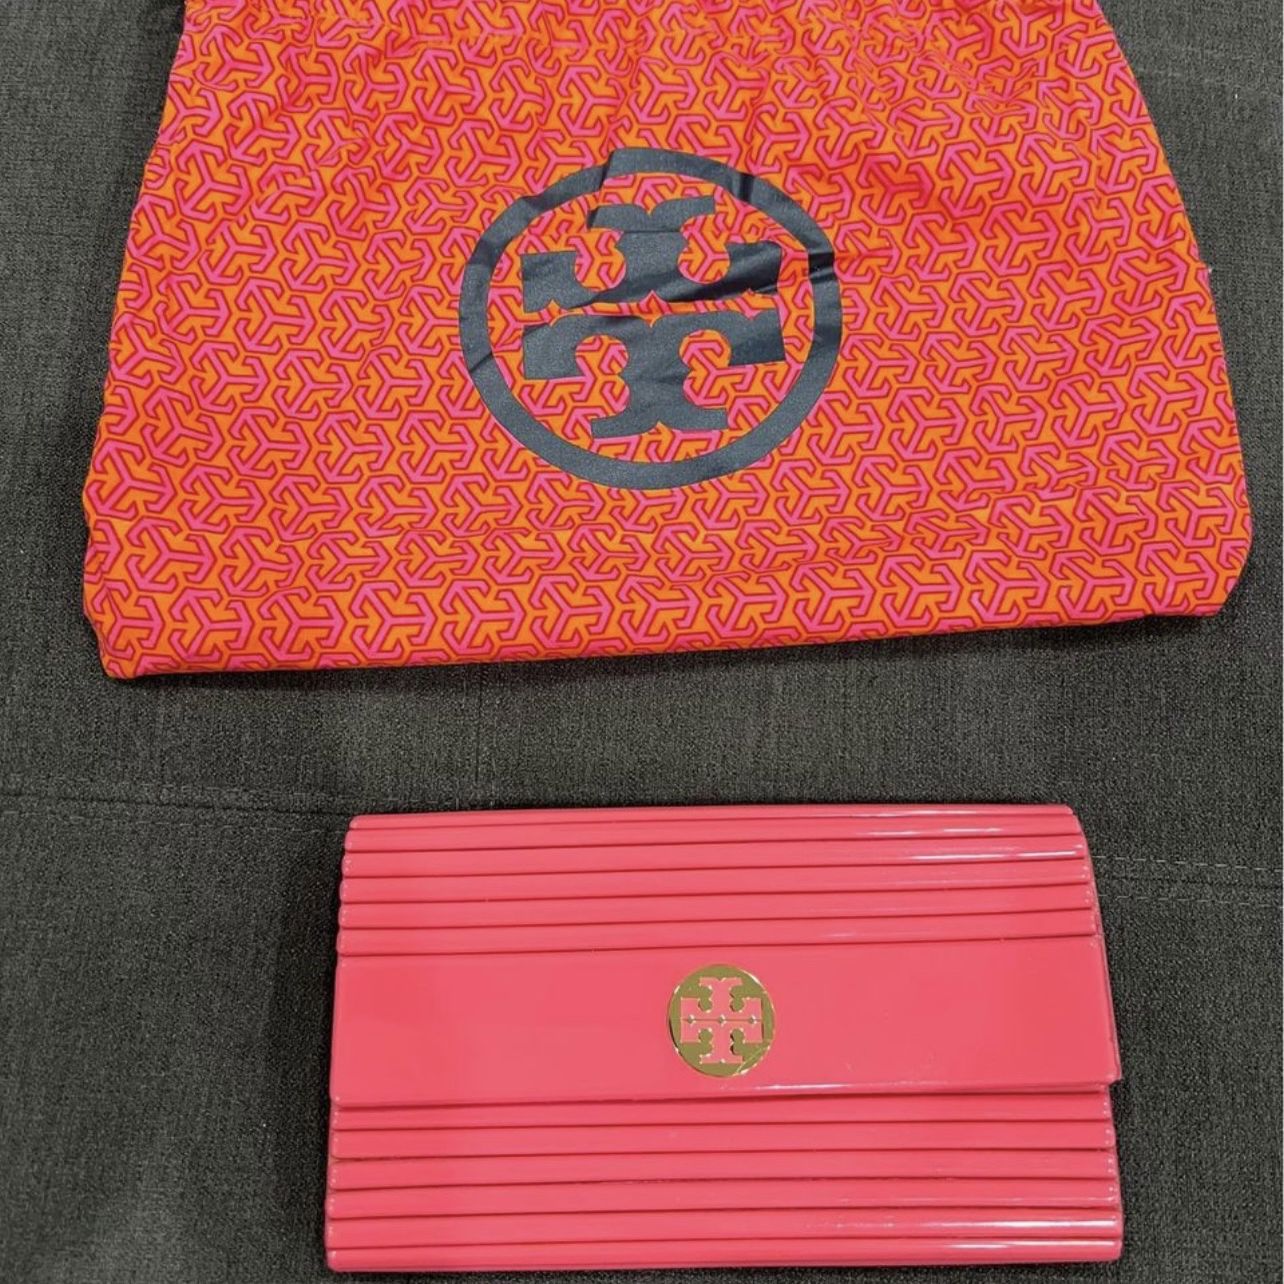 Tory Burch Clutch for Sale in Chicago, IL - OfferUp